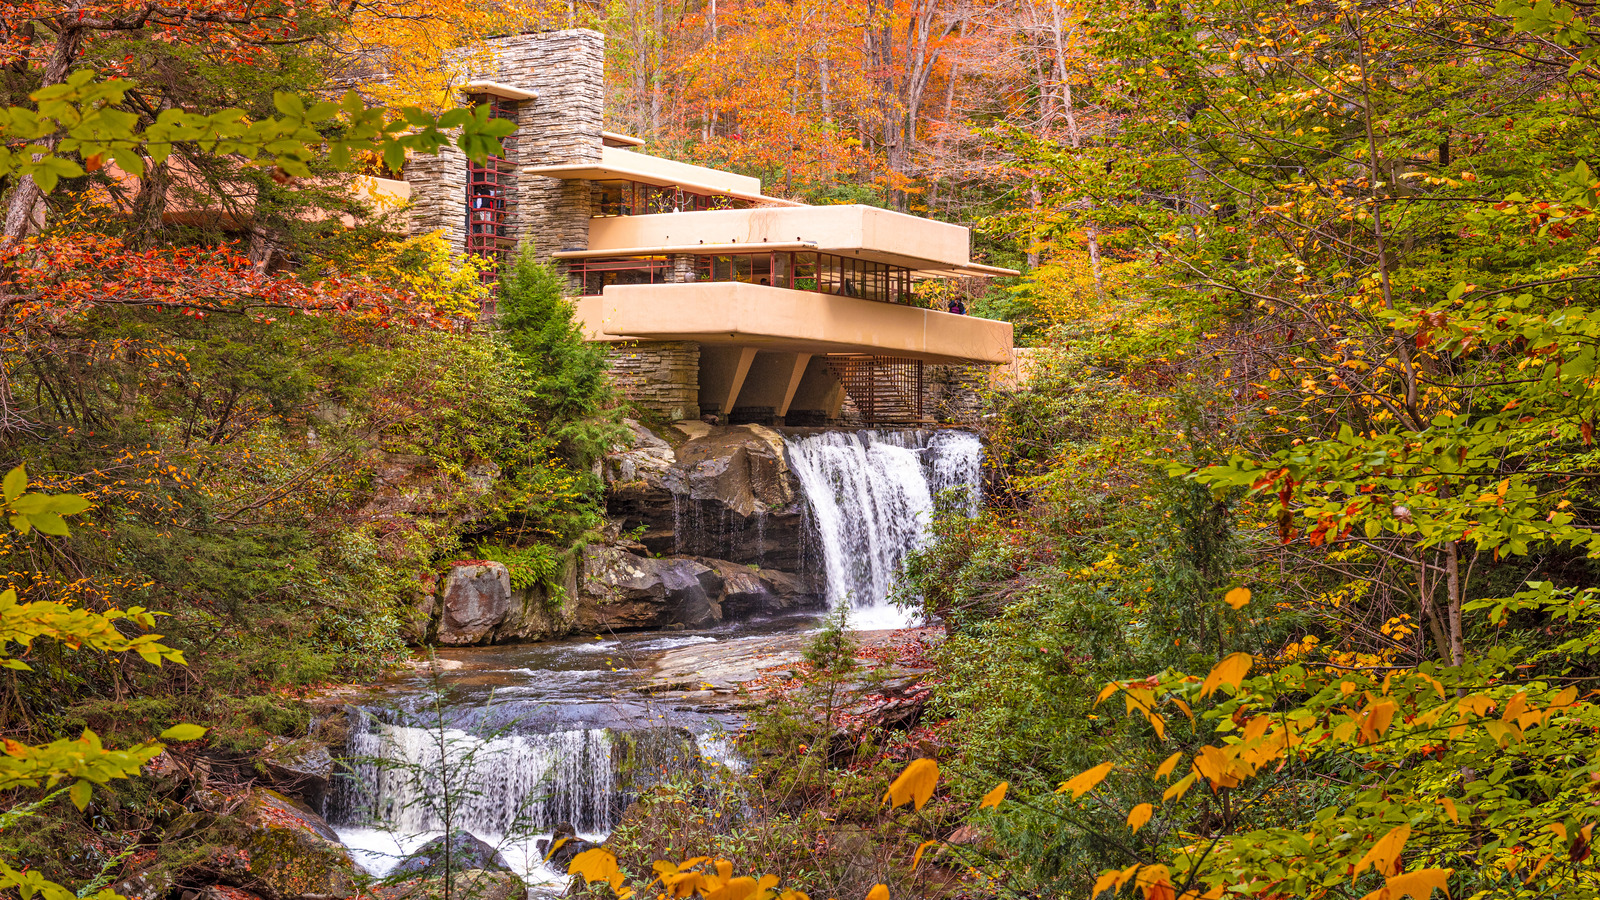   
																You'll Want To Stay In These 20 Homes That Were Designed By Iconic Architects 
															 